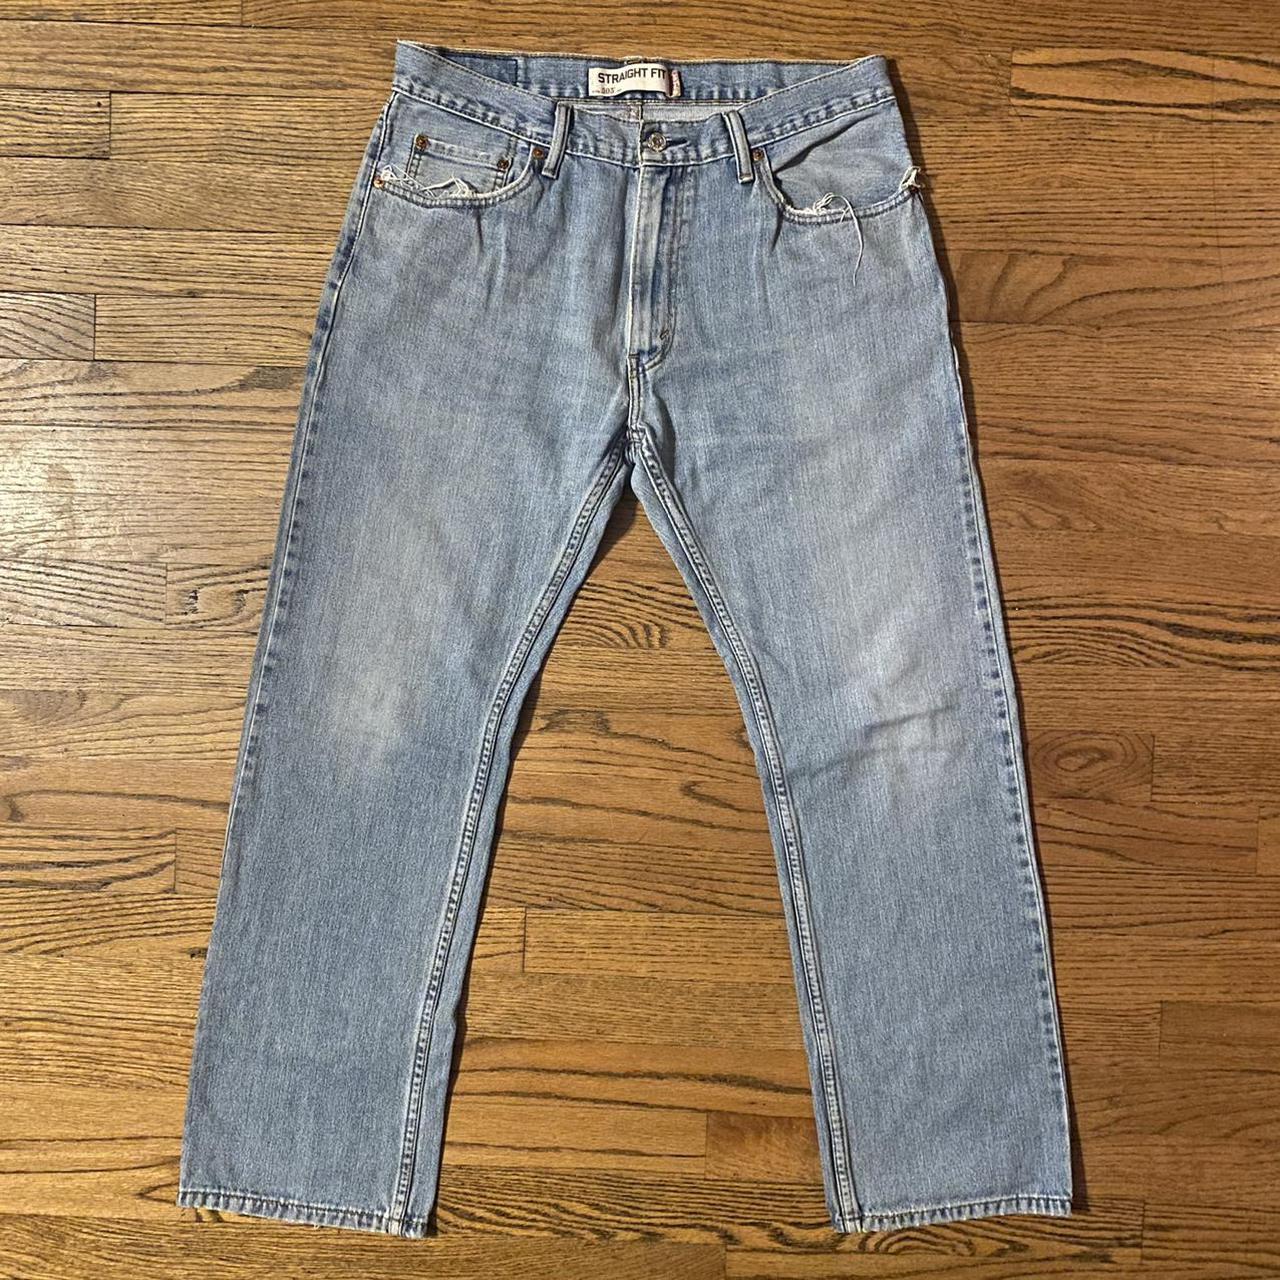 Product Image 1 - Levi’s 505 straight fit jeans.